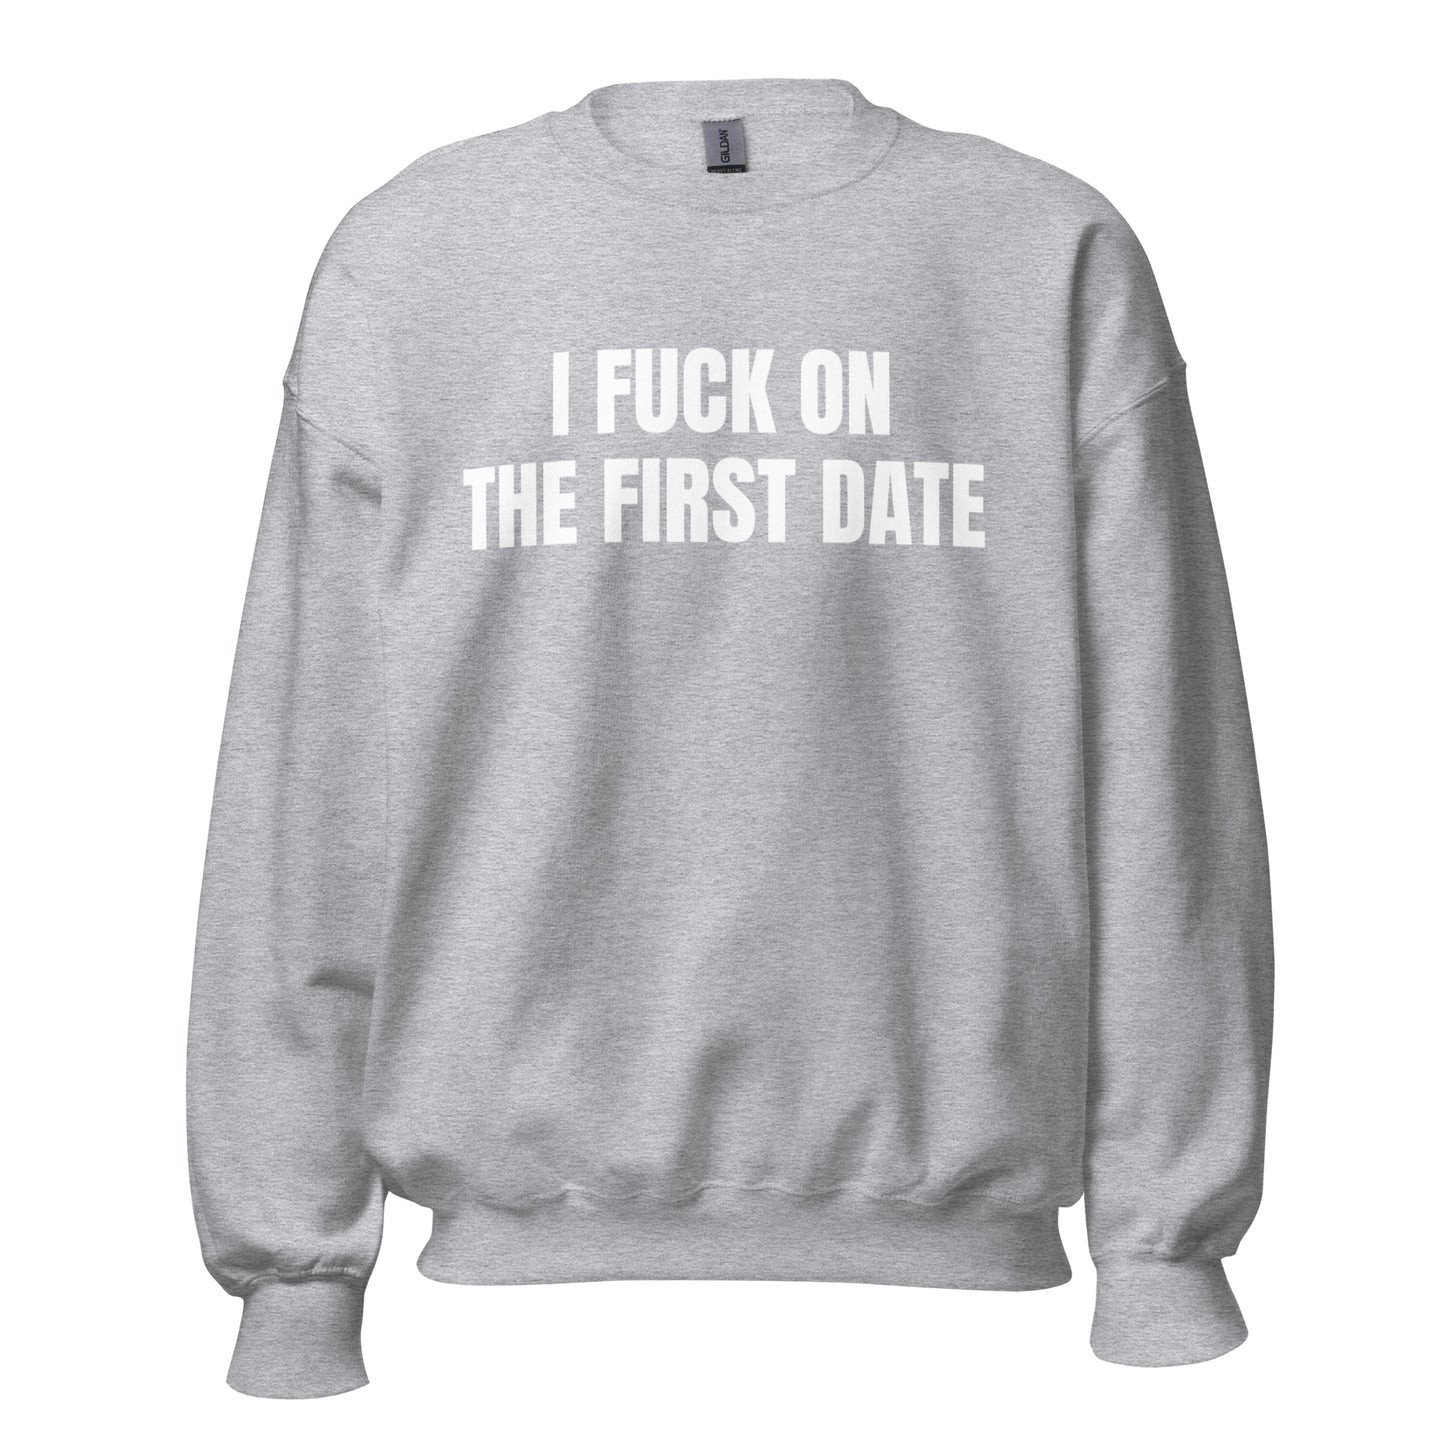 I FUCK ON THE FIRST DATE